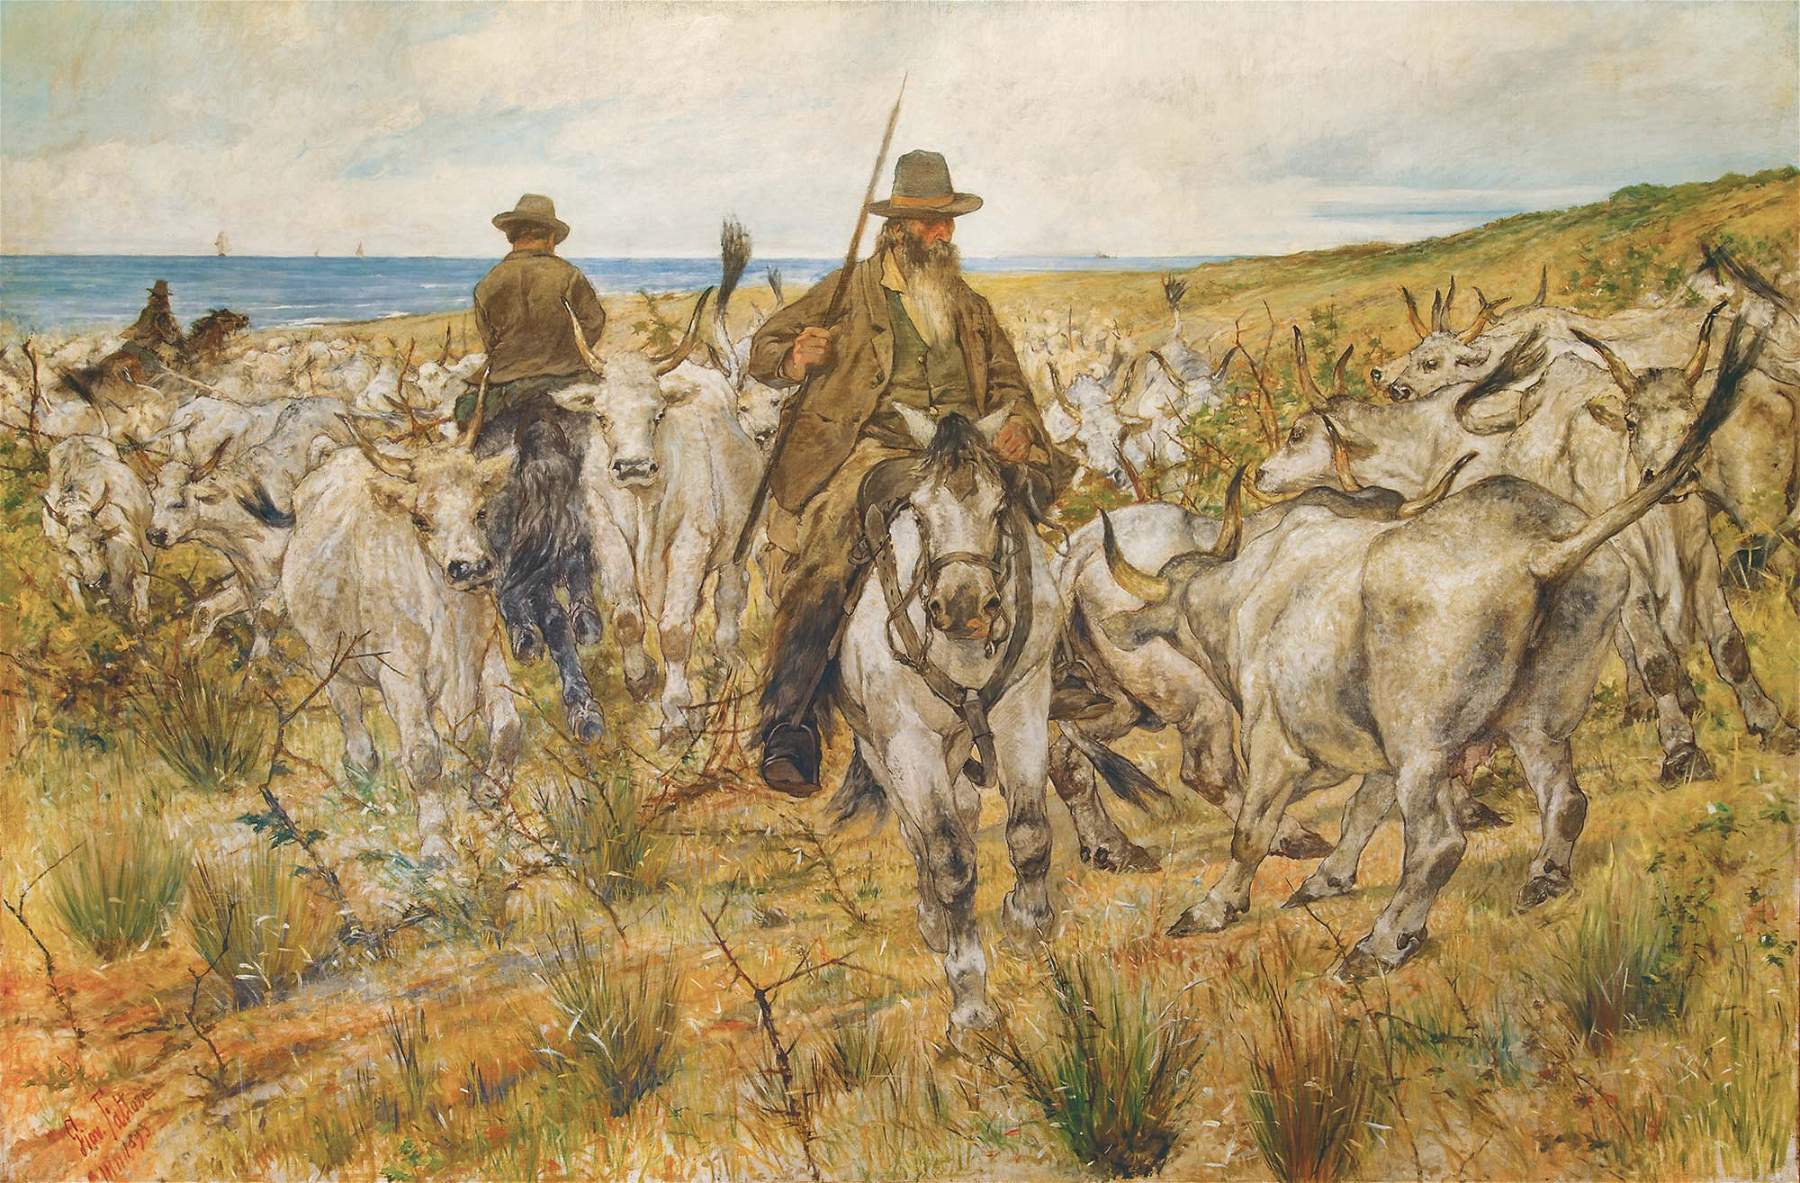 Trieste, at Revoltella Museum an exhibition on the Macchiaioli with more than 80 works